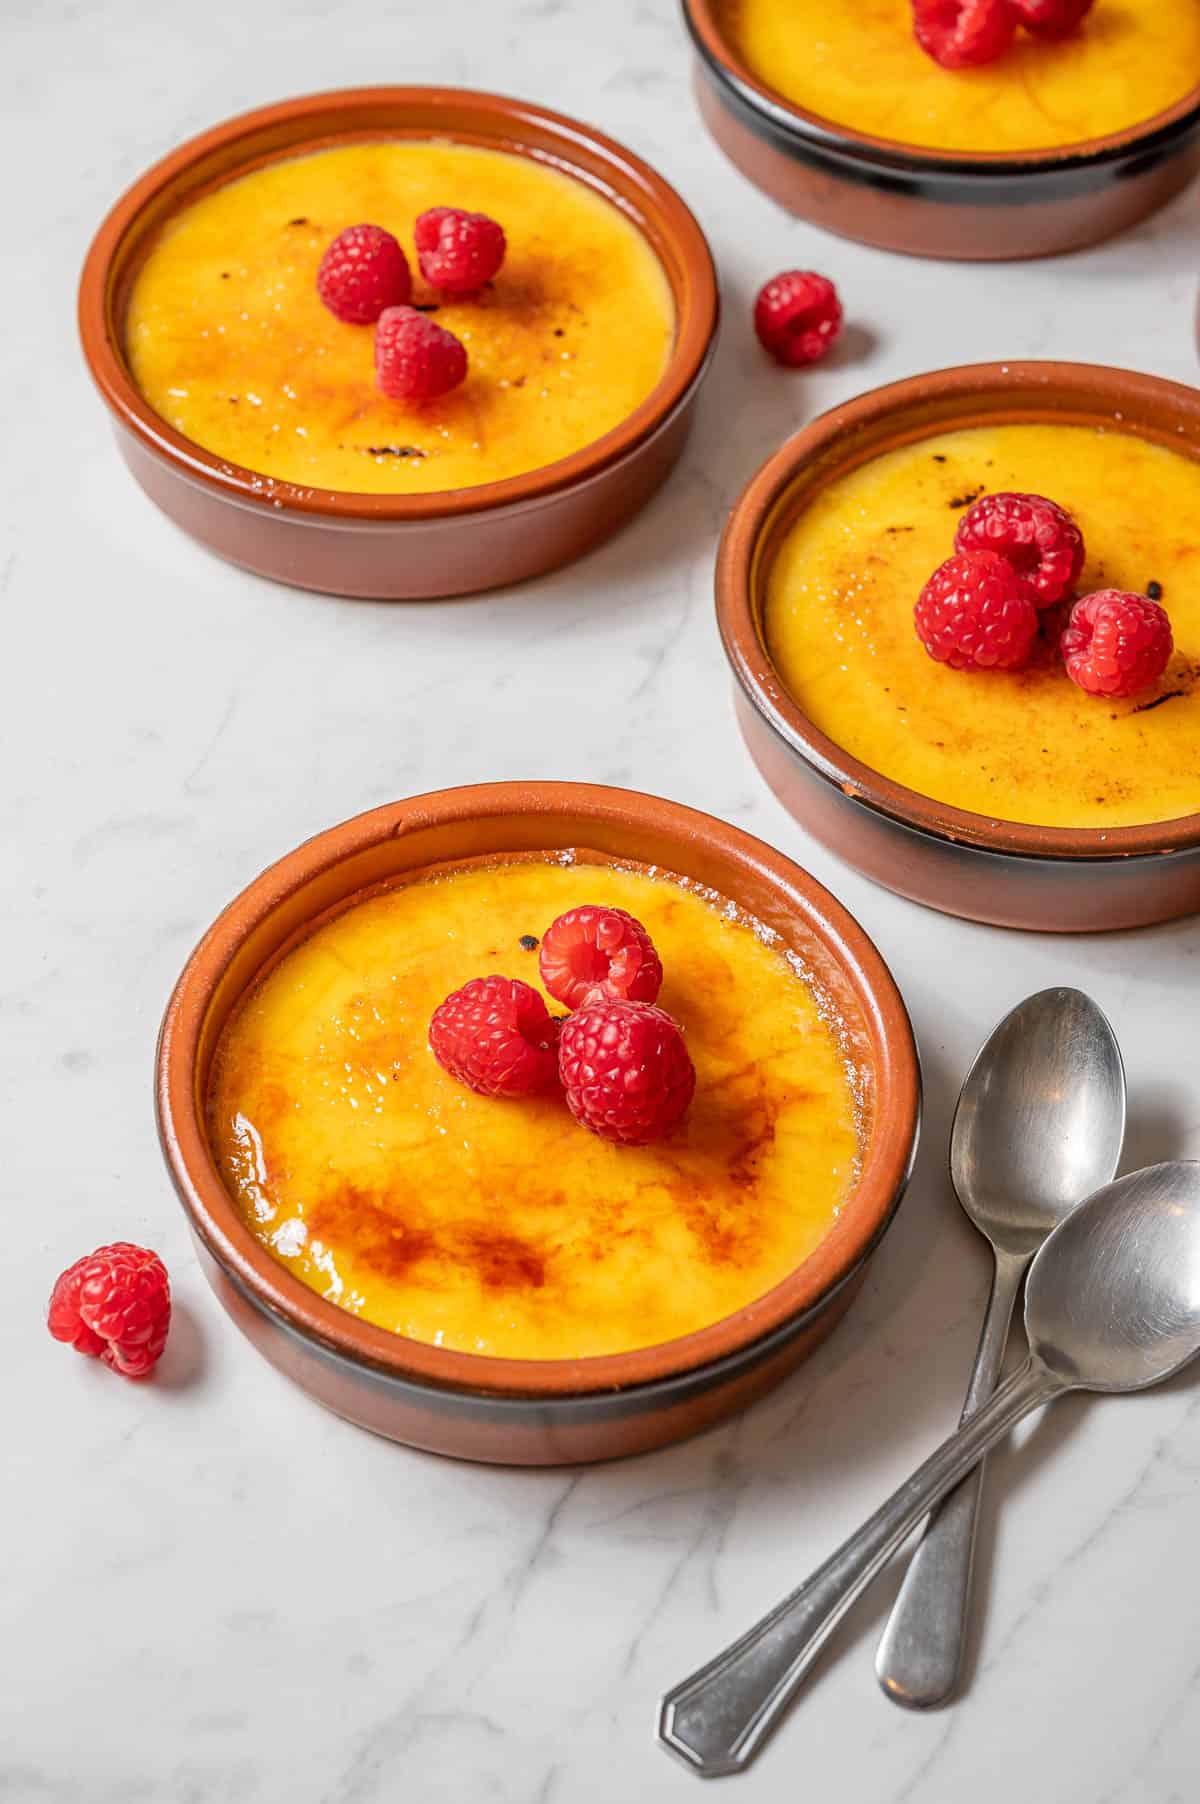 Four individual crema catalanas in clay dishes with raspberries.